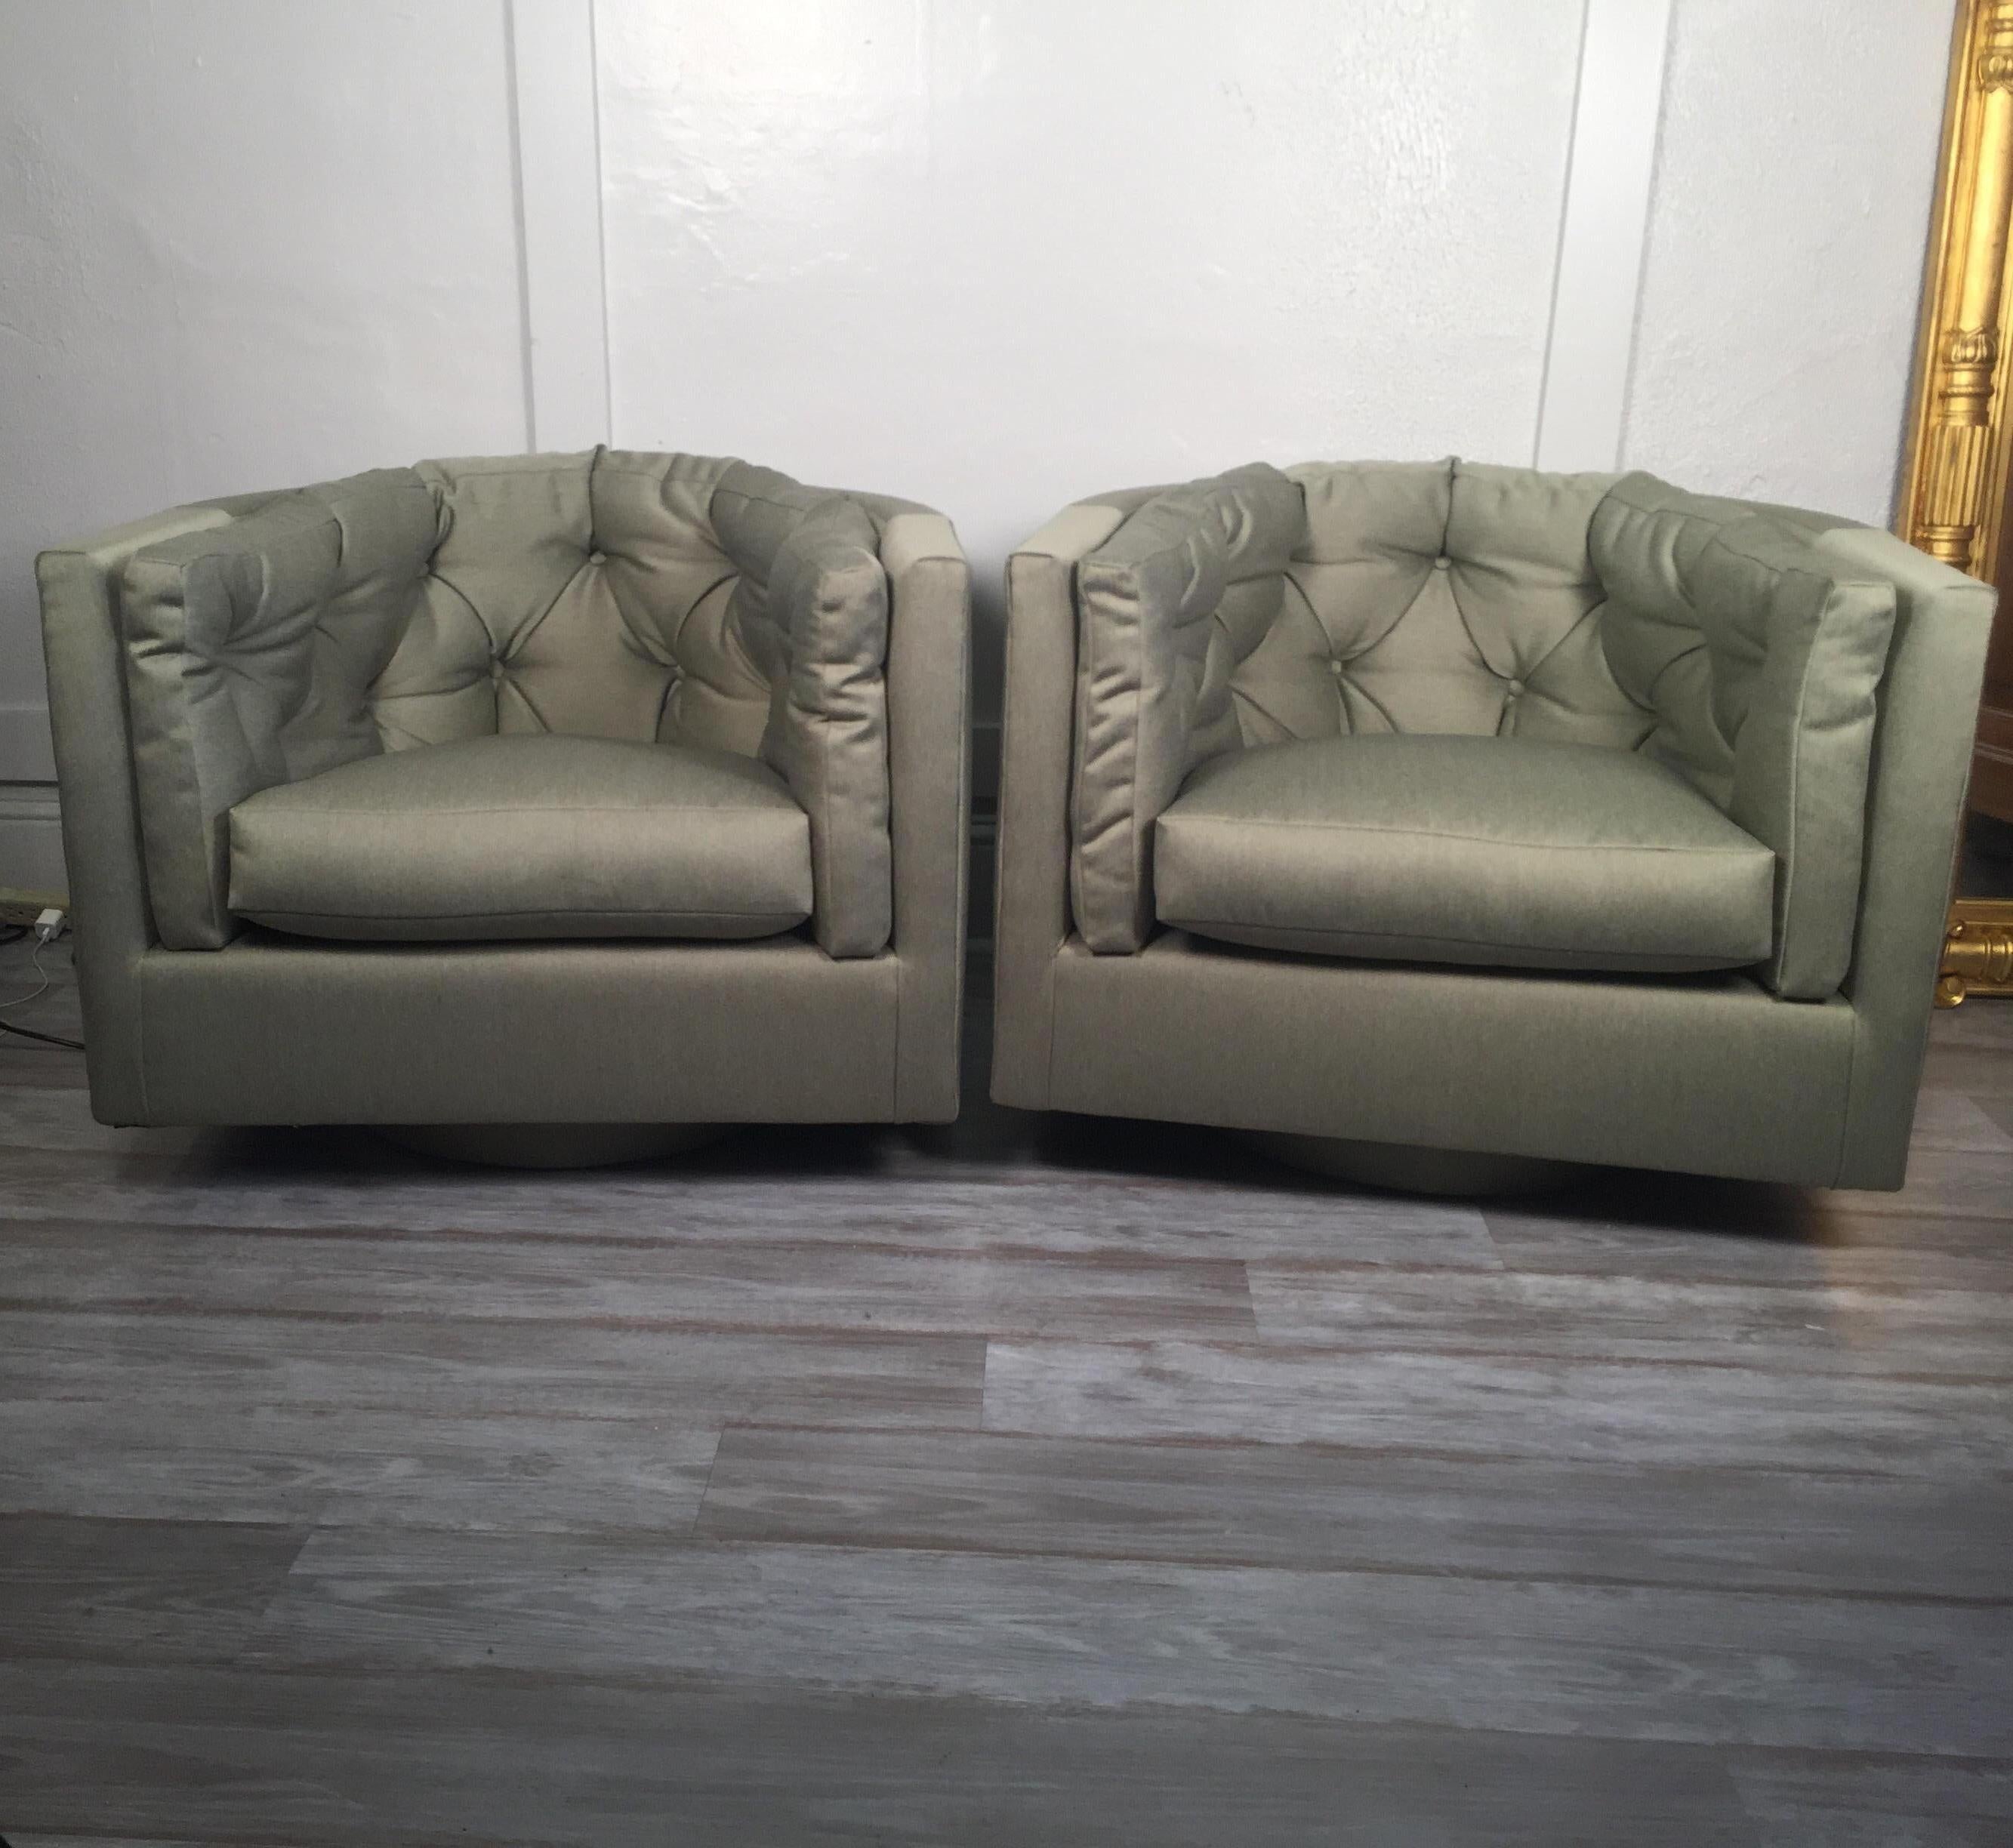 Pair of swiveling barrel-back chairs with new button-tufted upholstery.